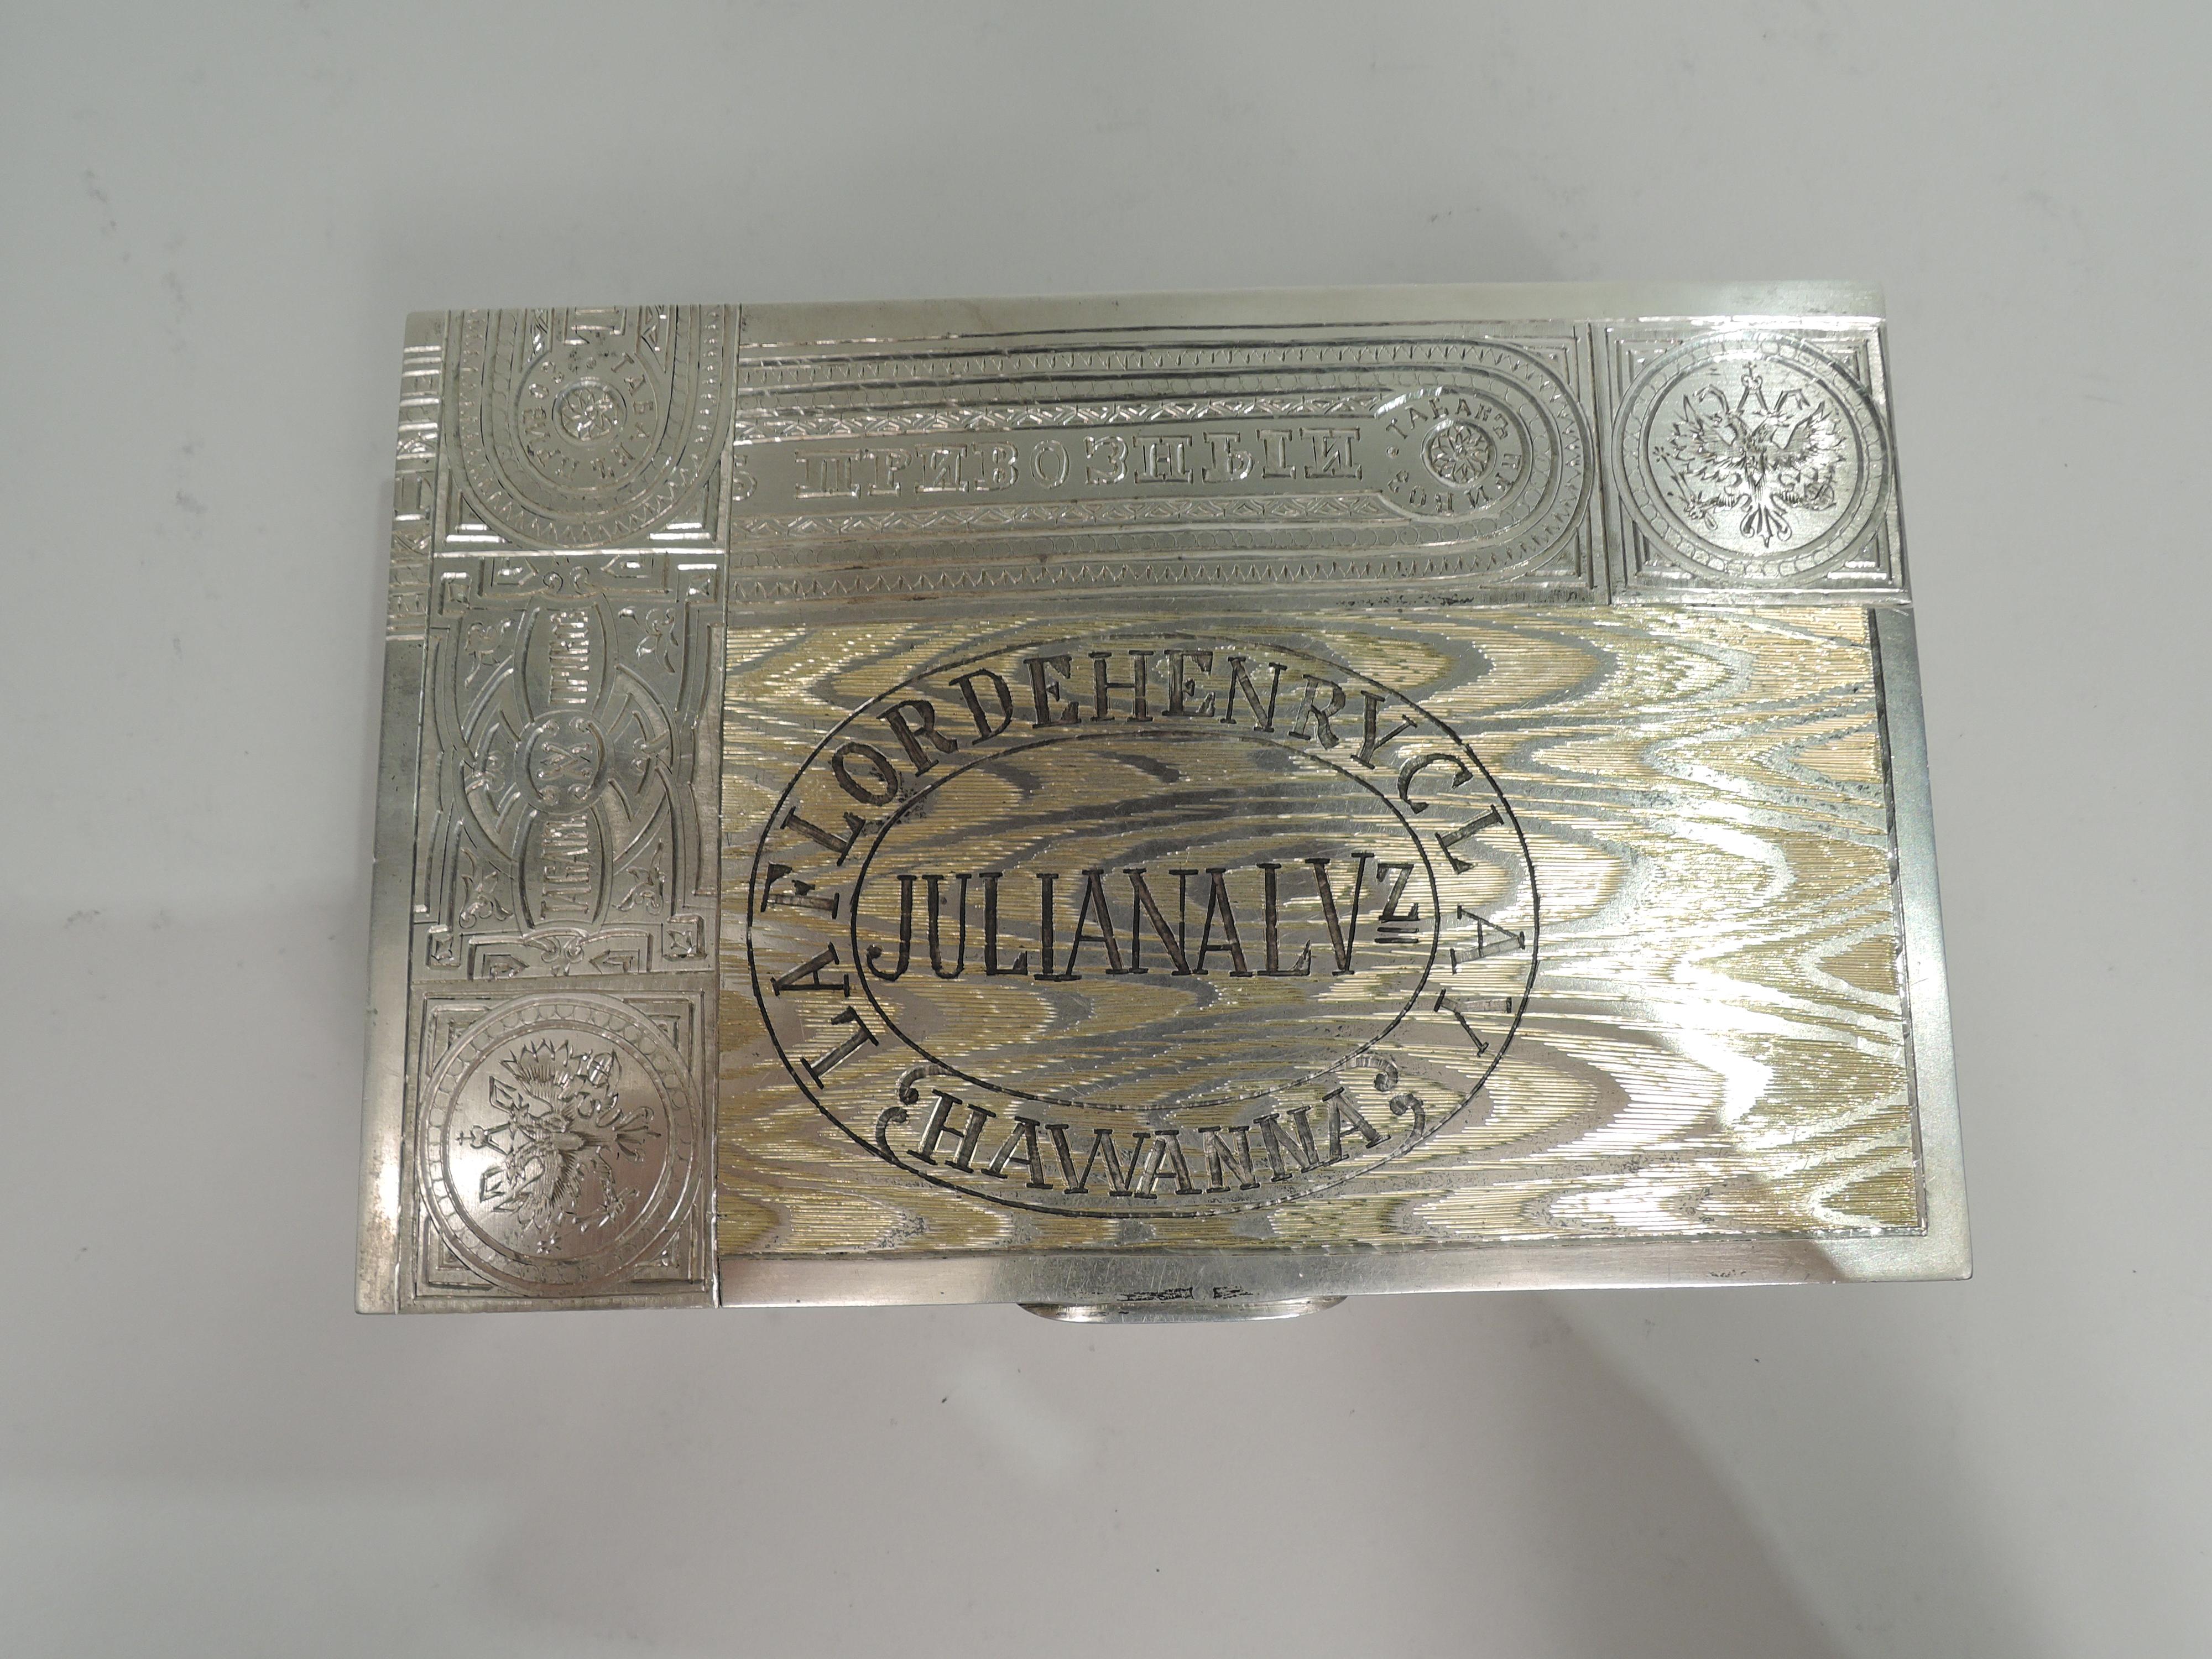 Russian 875 silver novelty cigar box, ca 1910. Rectangular with flat, hinged, and tabbed cover. Trompe l’oeil lightly gilt wood panels with realistic grain and tax stamps. Gilt interior. Based on the packaging of the very real Julian Alvarez in